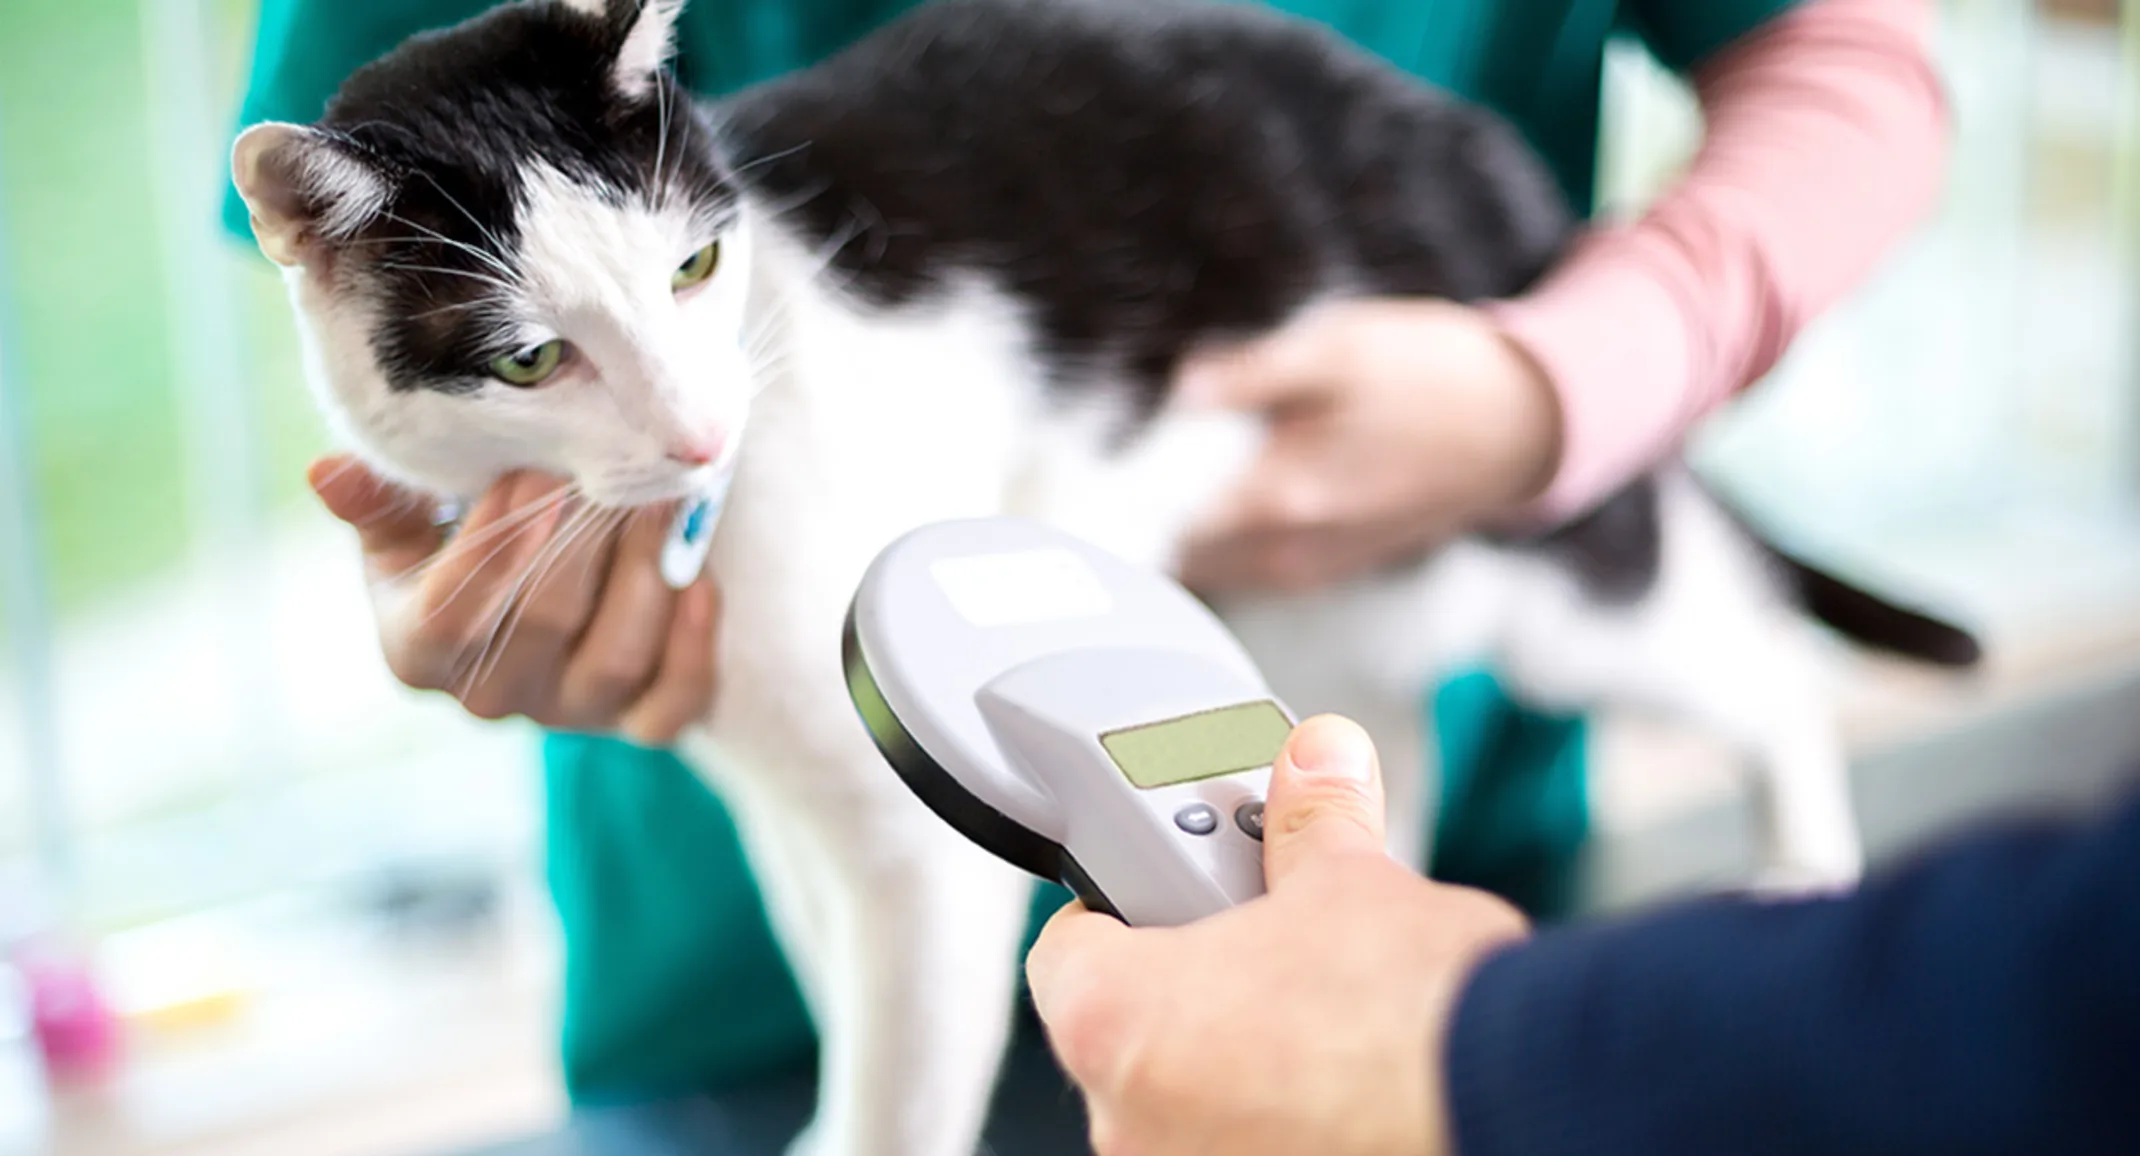 Black and white cat getting microchipped